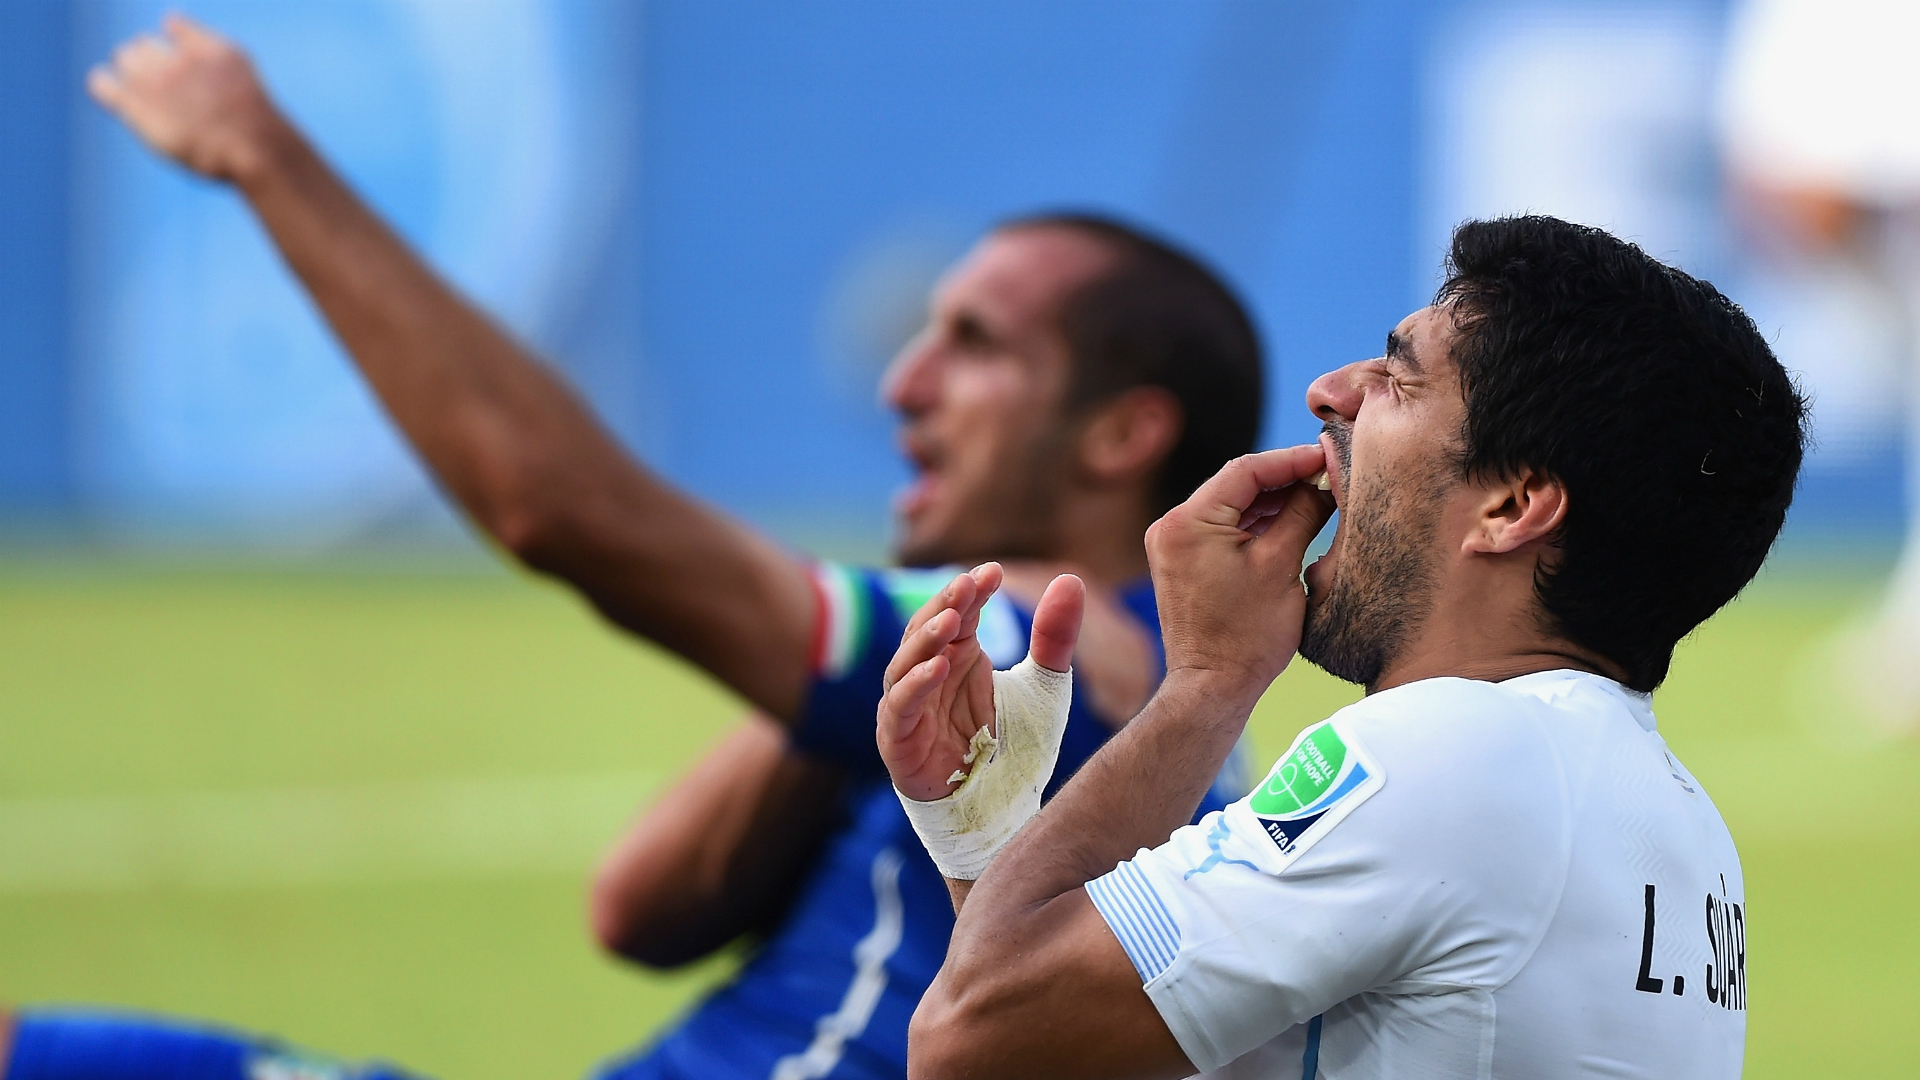 Giorgio Chiellini was bitten by Luis Suarez in a crucial World Cup game but forgave him because he admits to sharing similar tendencies.